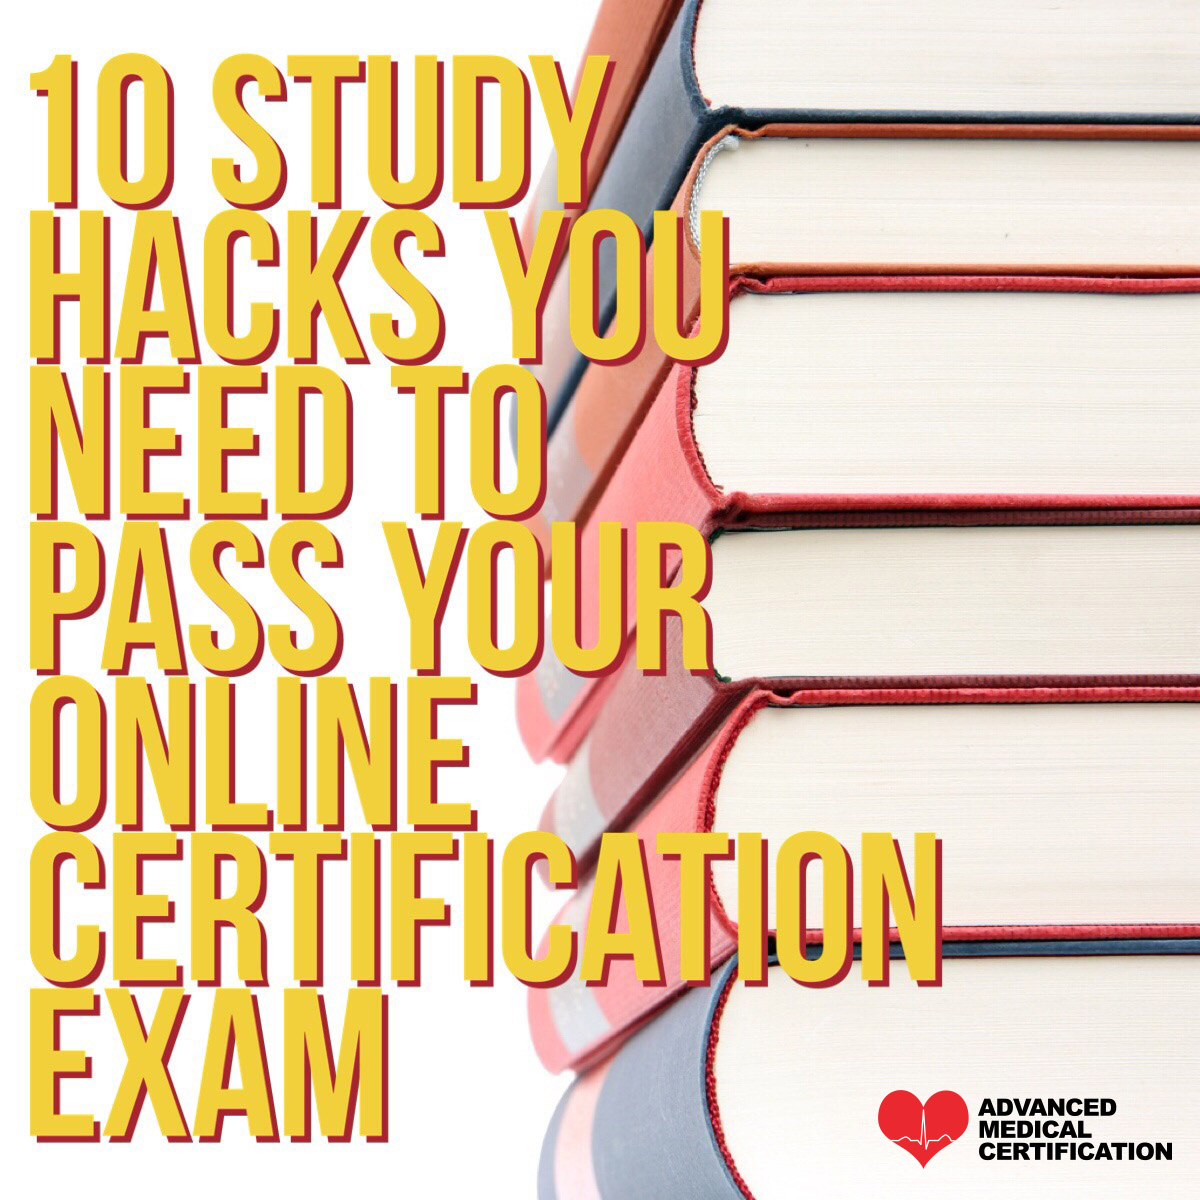 10 study hacks you need to pass your online certification exam